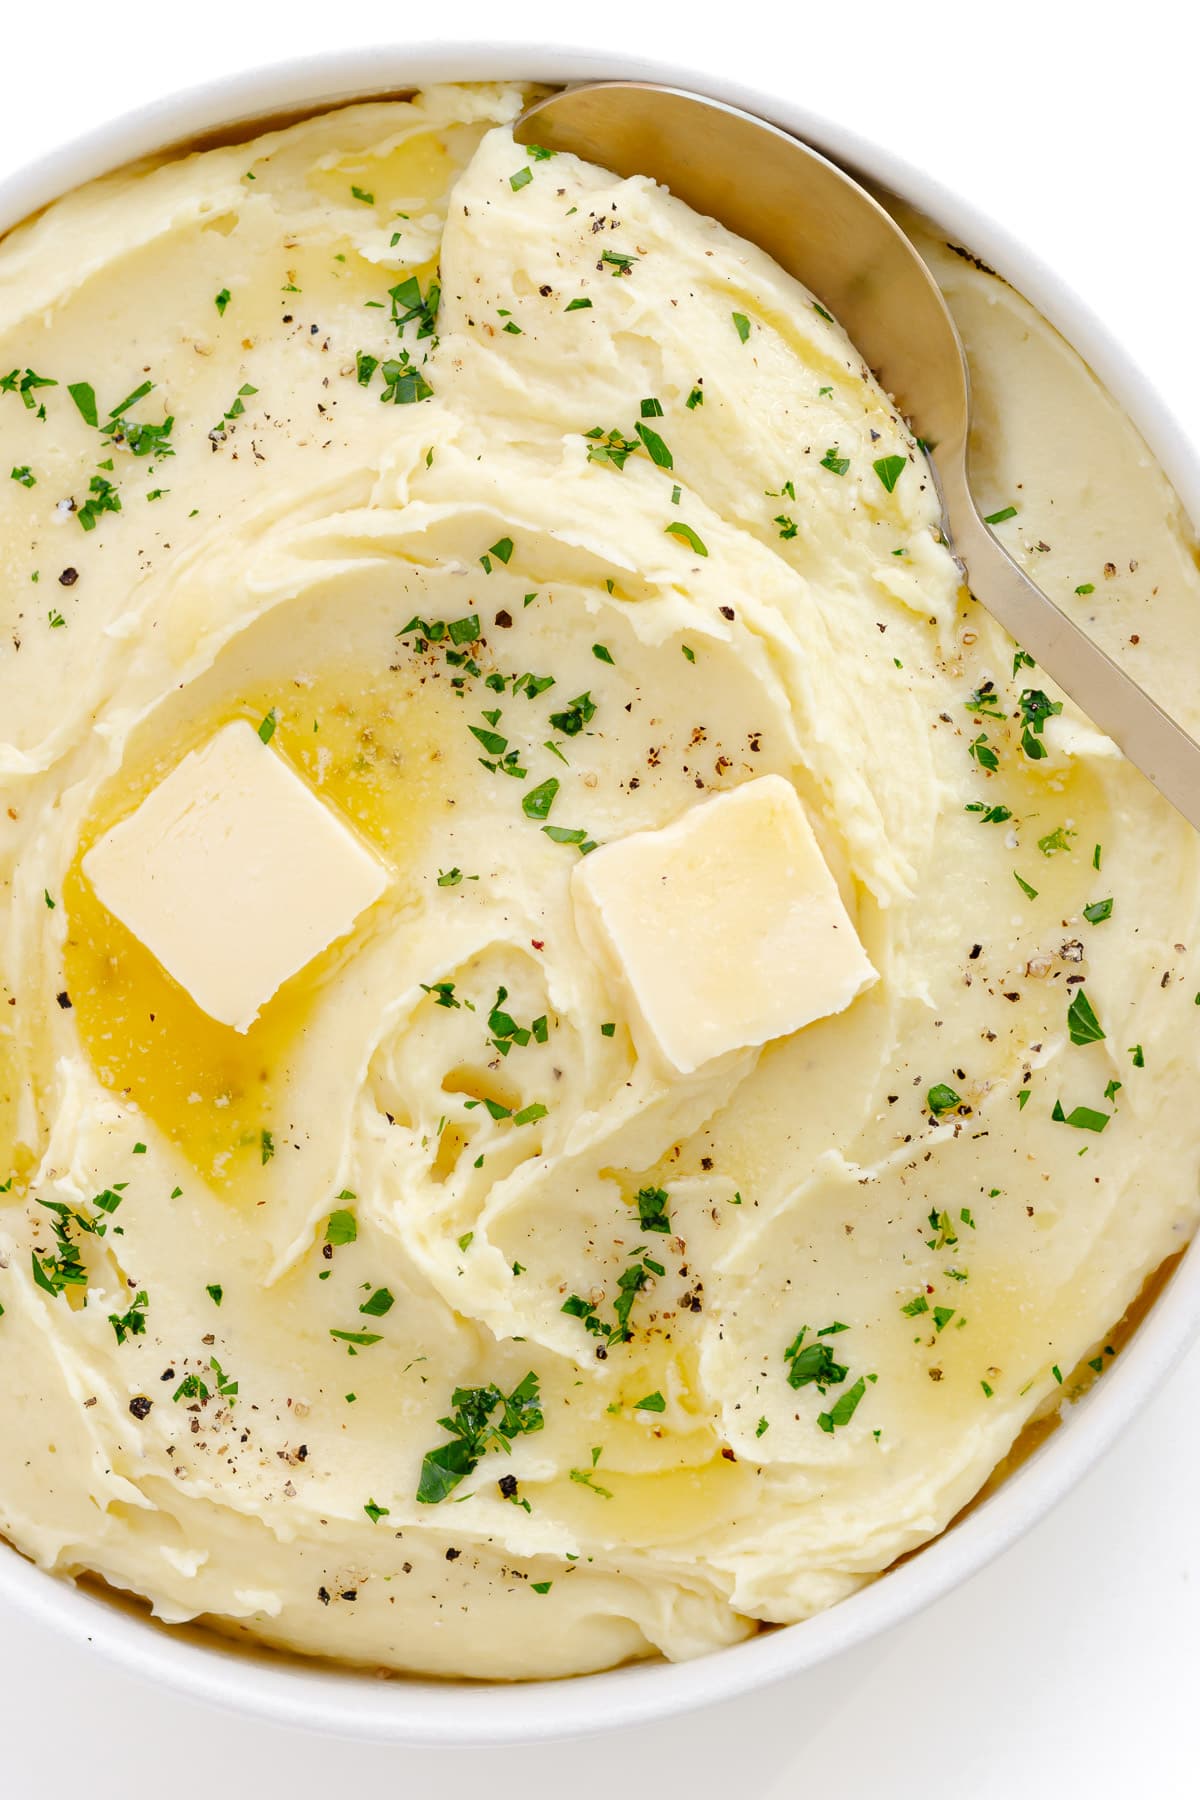 Creamy mashed potatoes in a white serving bowl with serving spoon.